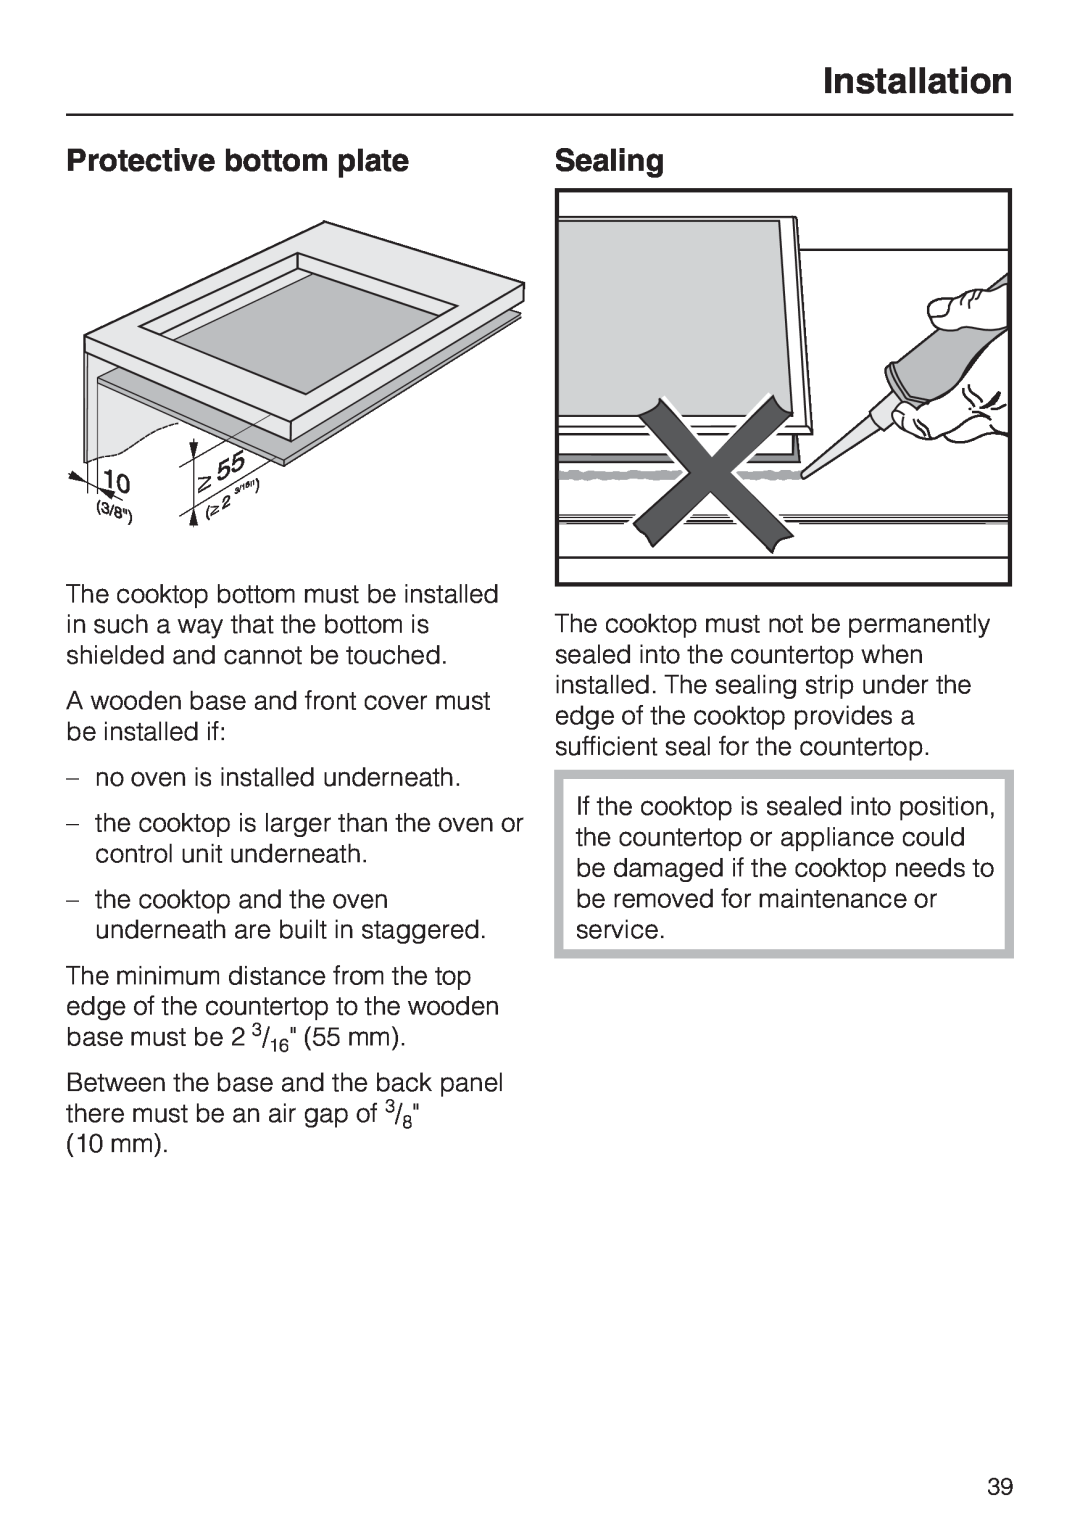 Miele KM5676 installation instructions Protective bottom plate, Sealing, Installation 